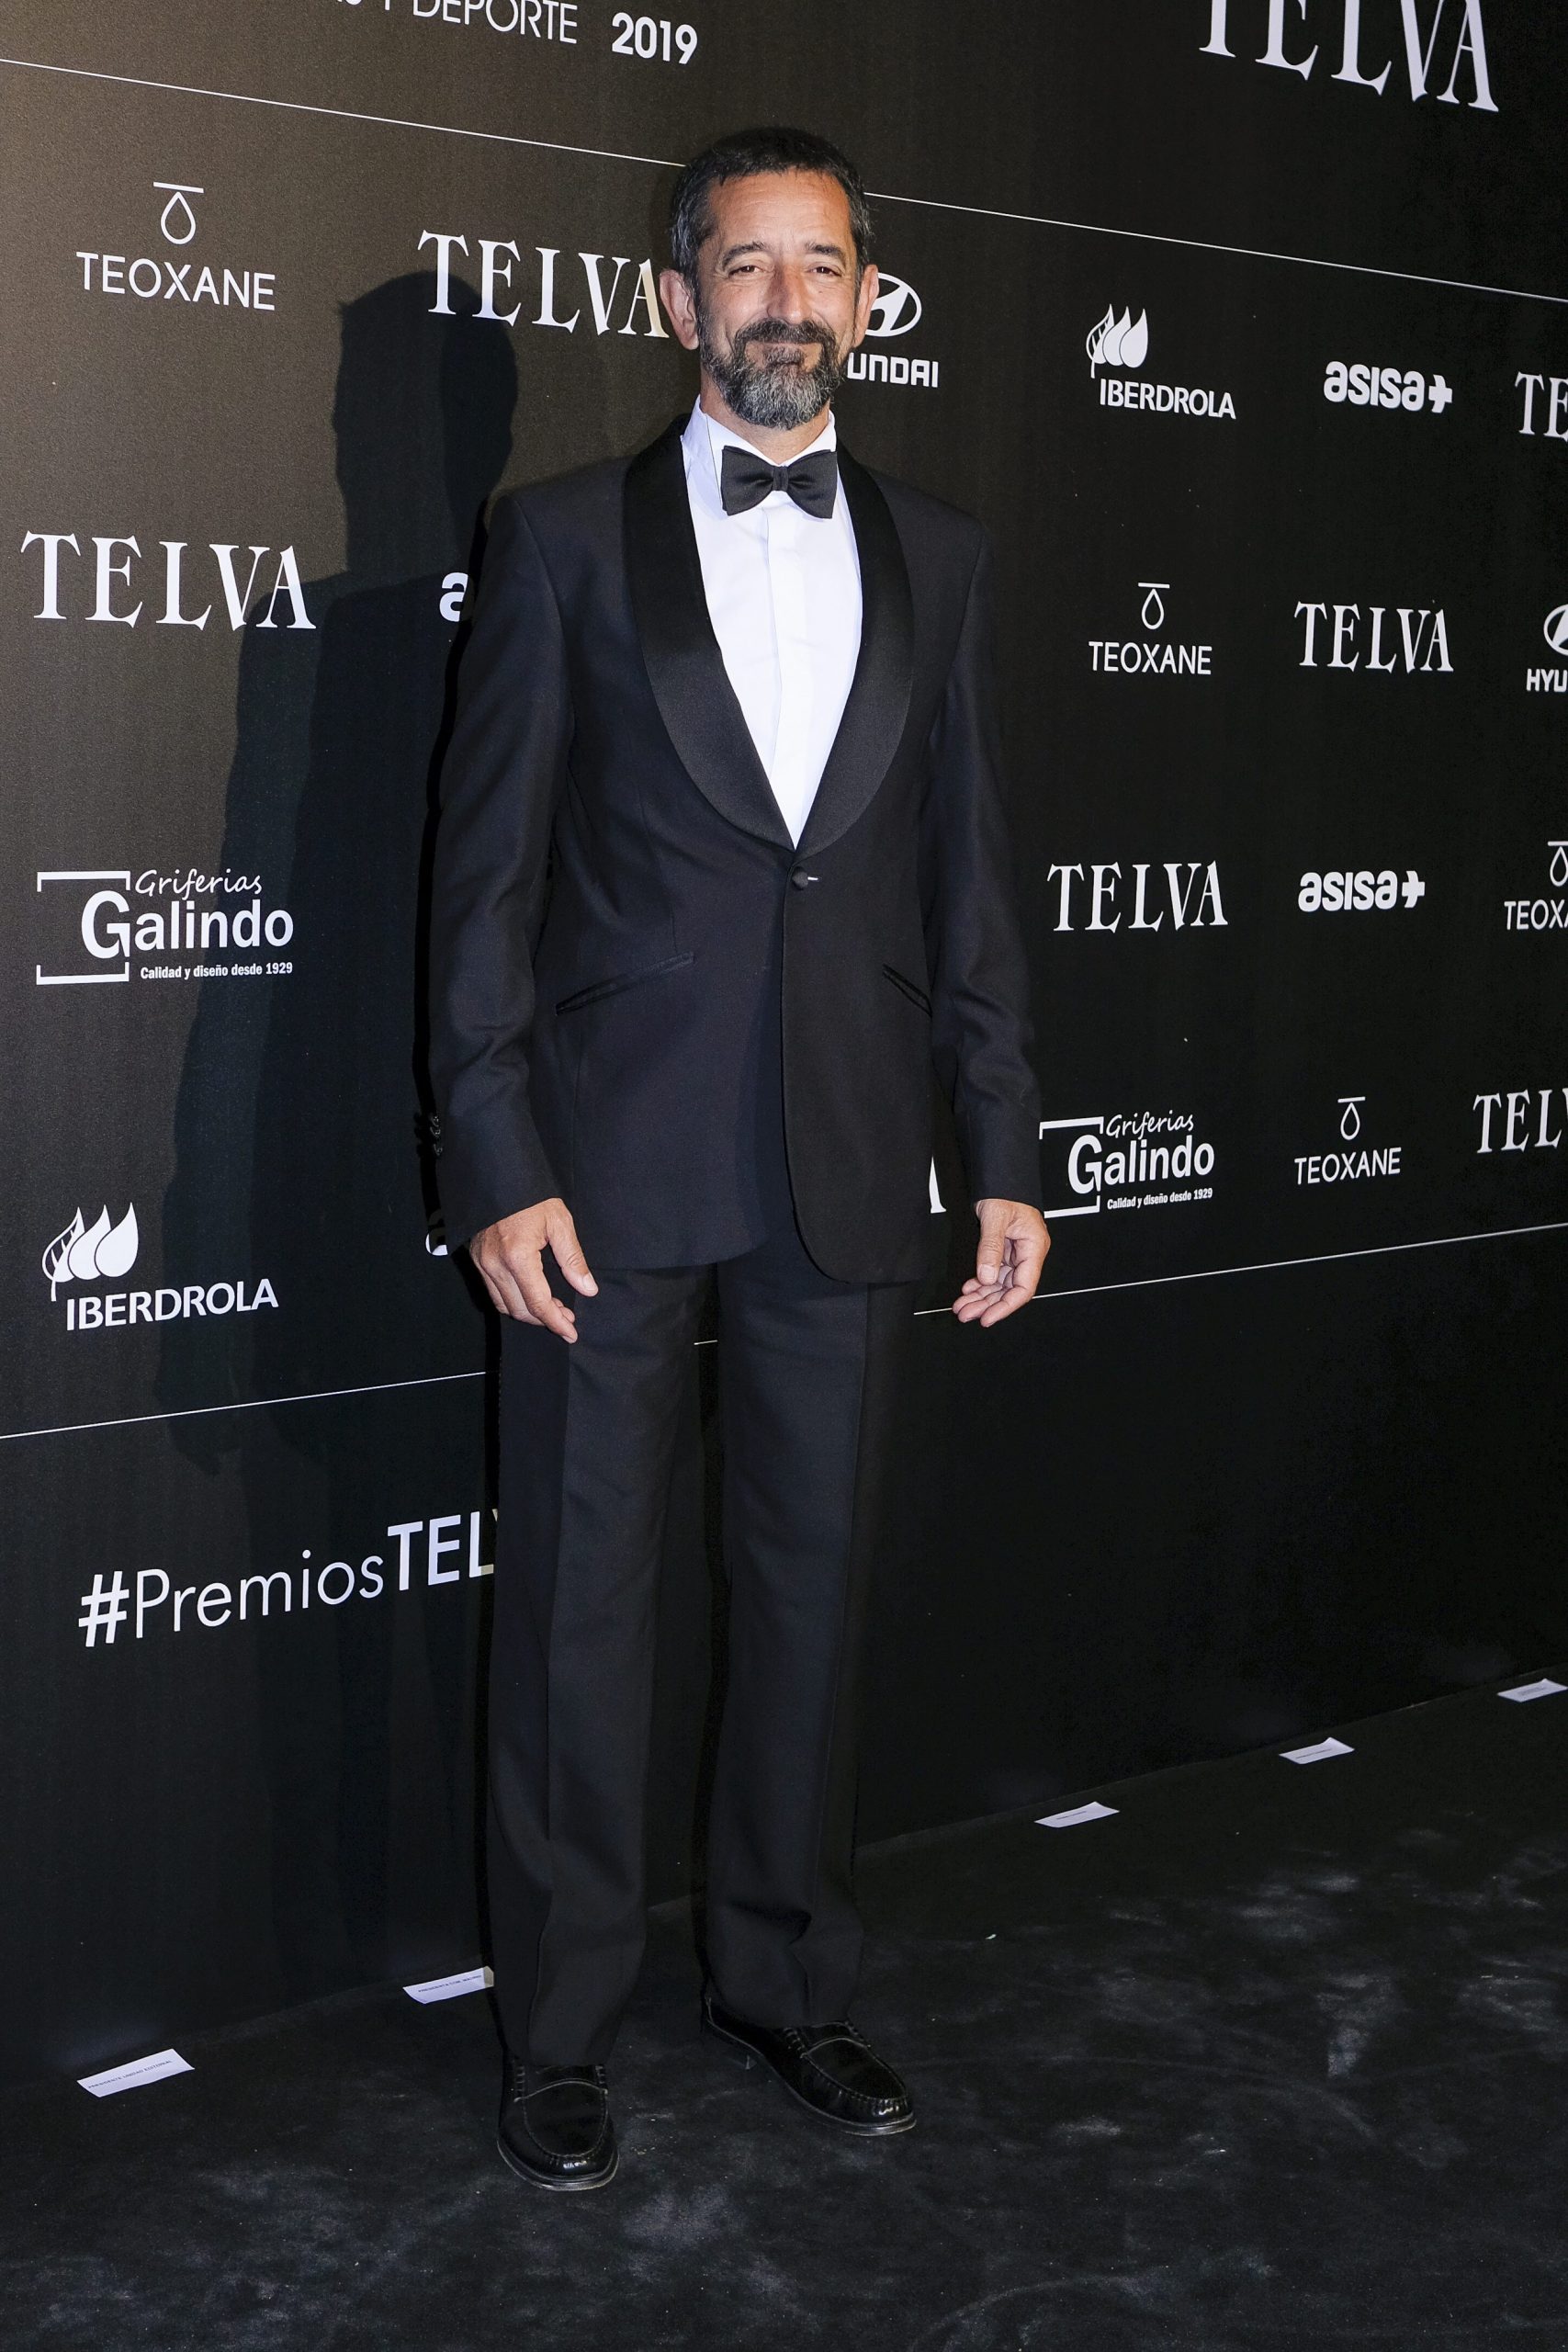 Cavadas at an award ceremony in Madrid in 2019